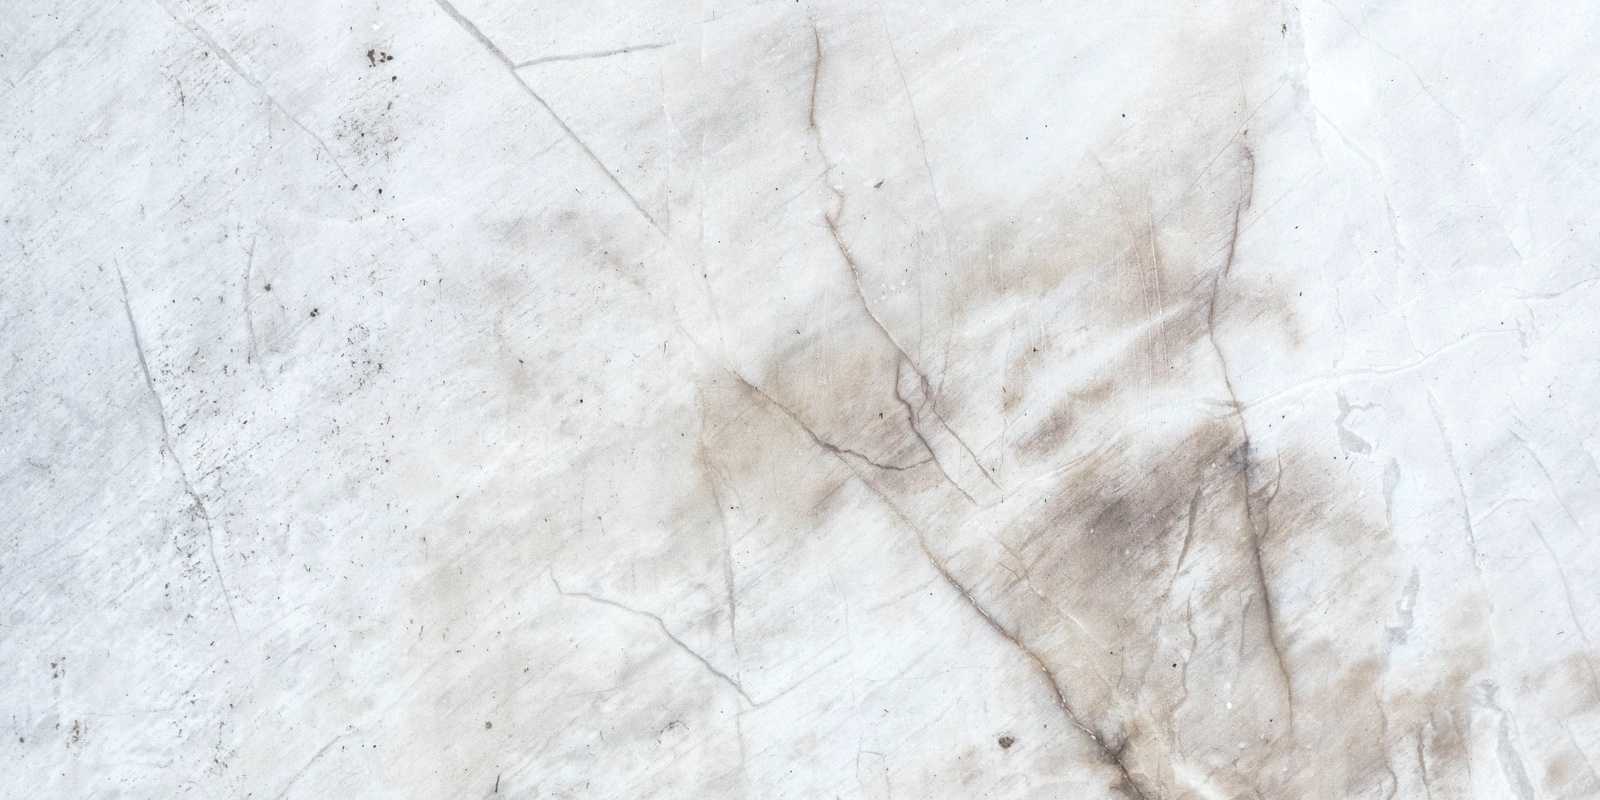 Materials That Can Damage Marble Surfaces